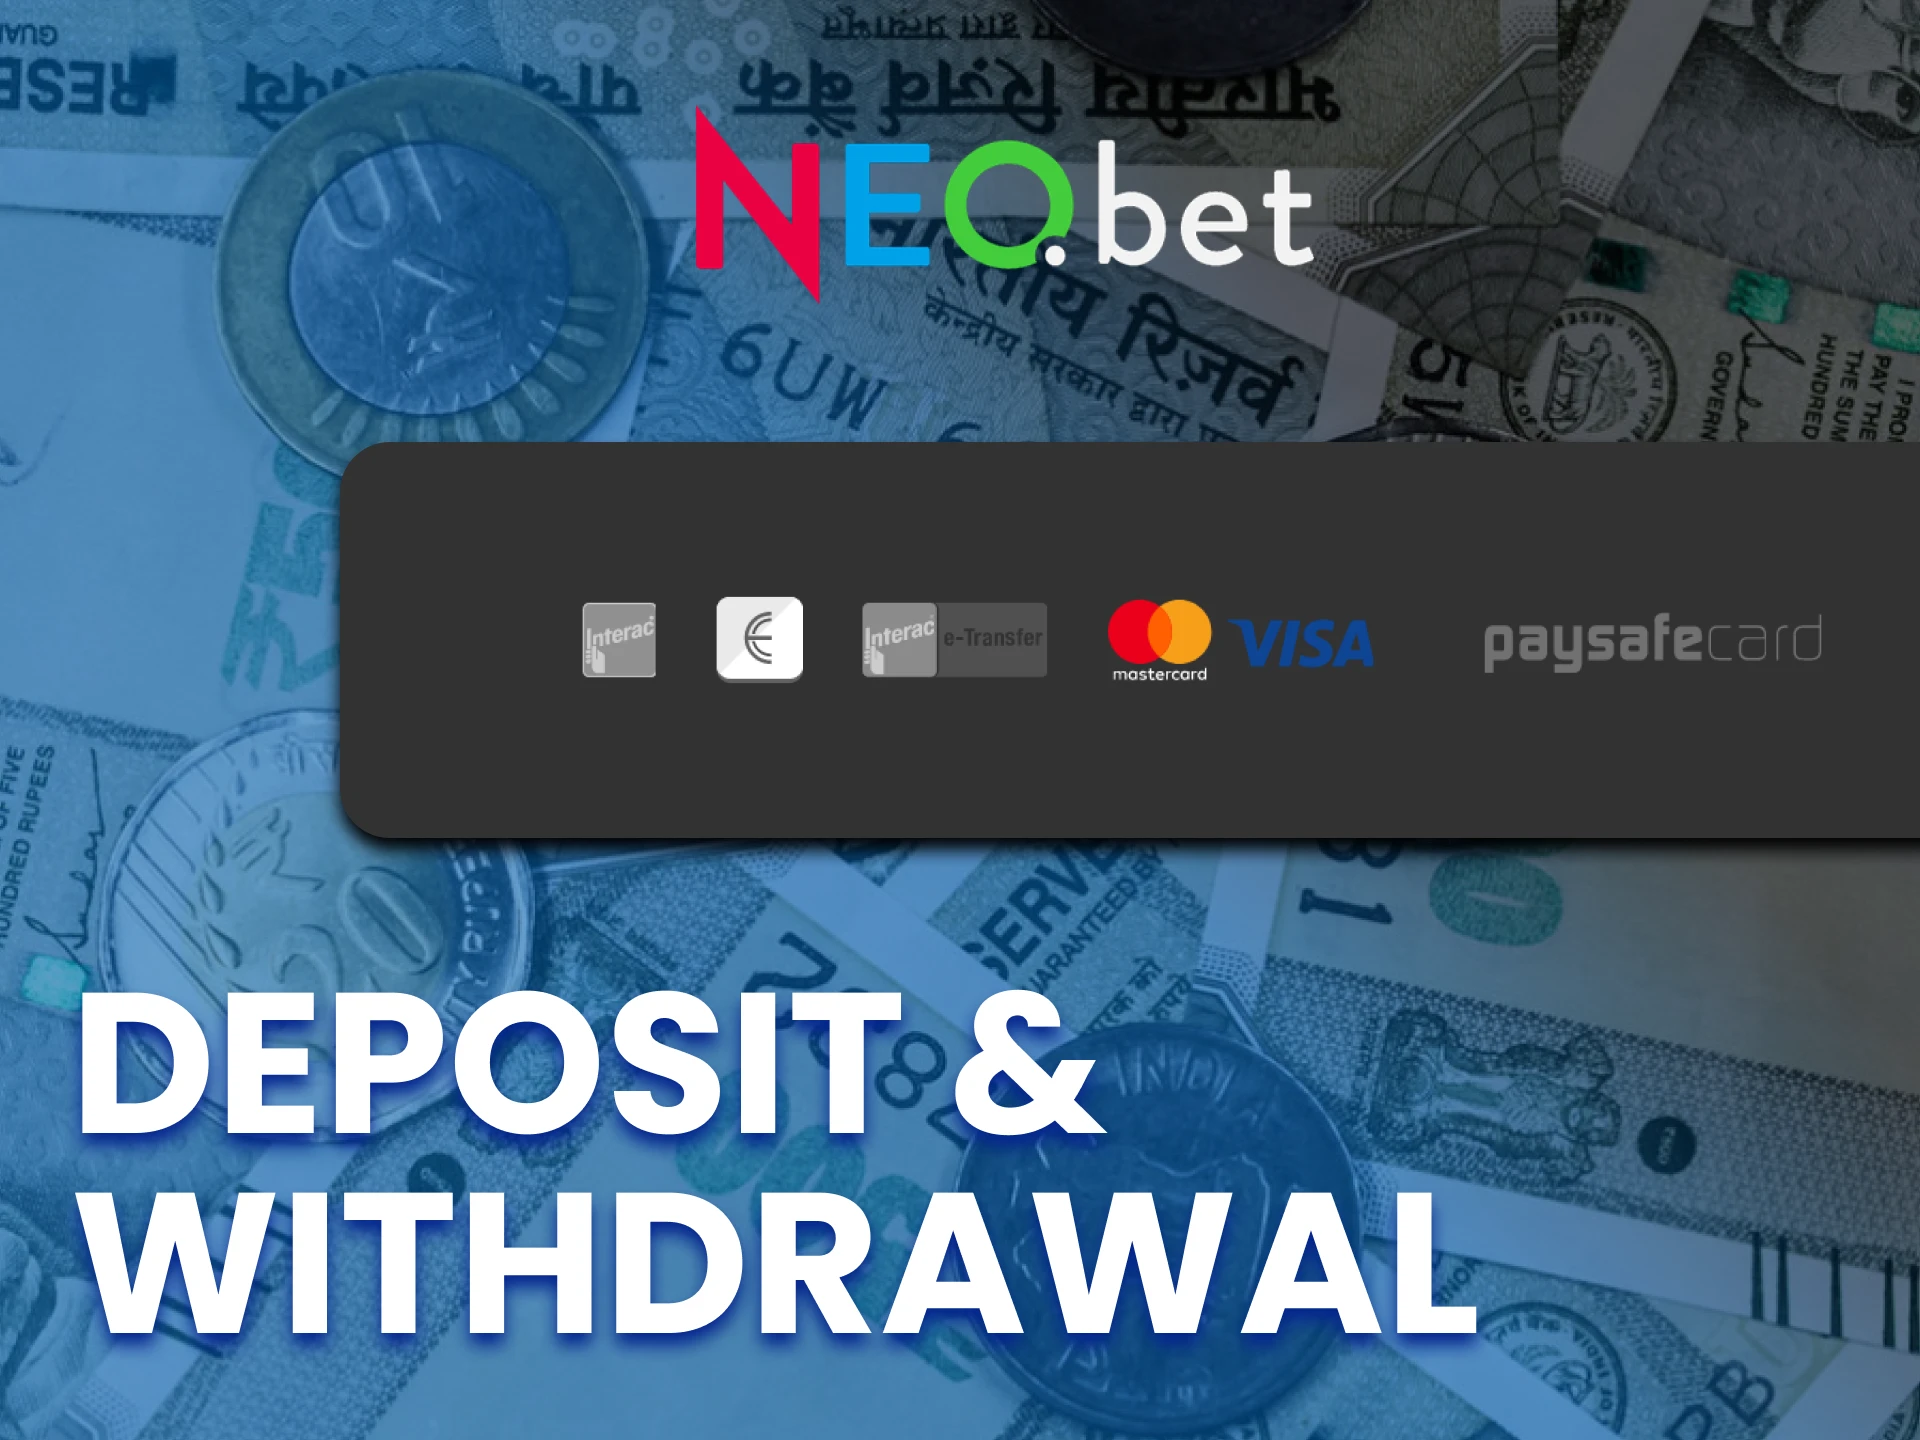 There are various deposit and withdrawal methods available in the NEO.bet app.